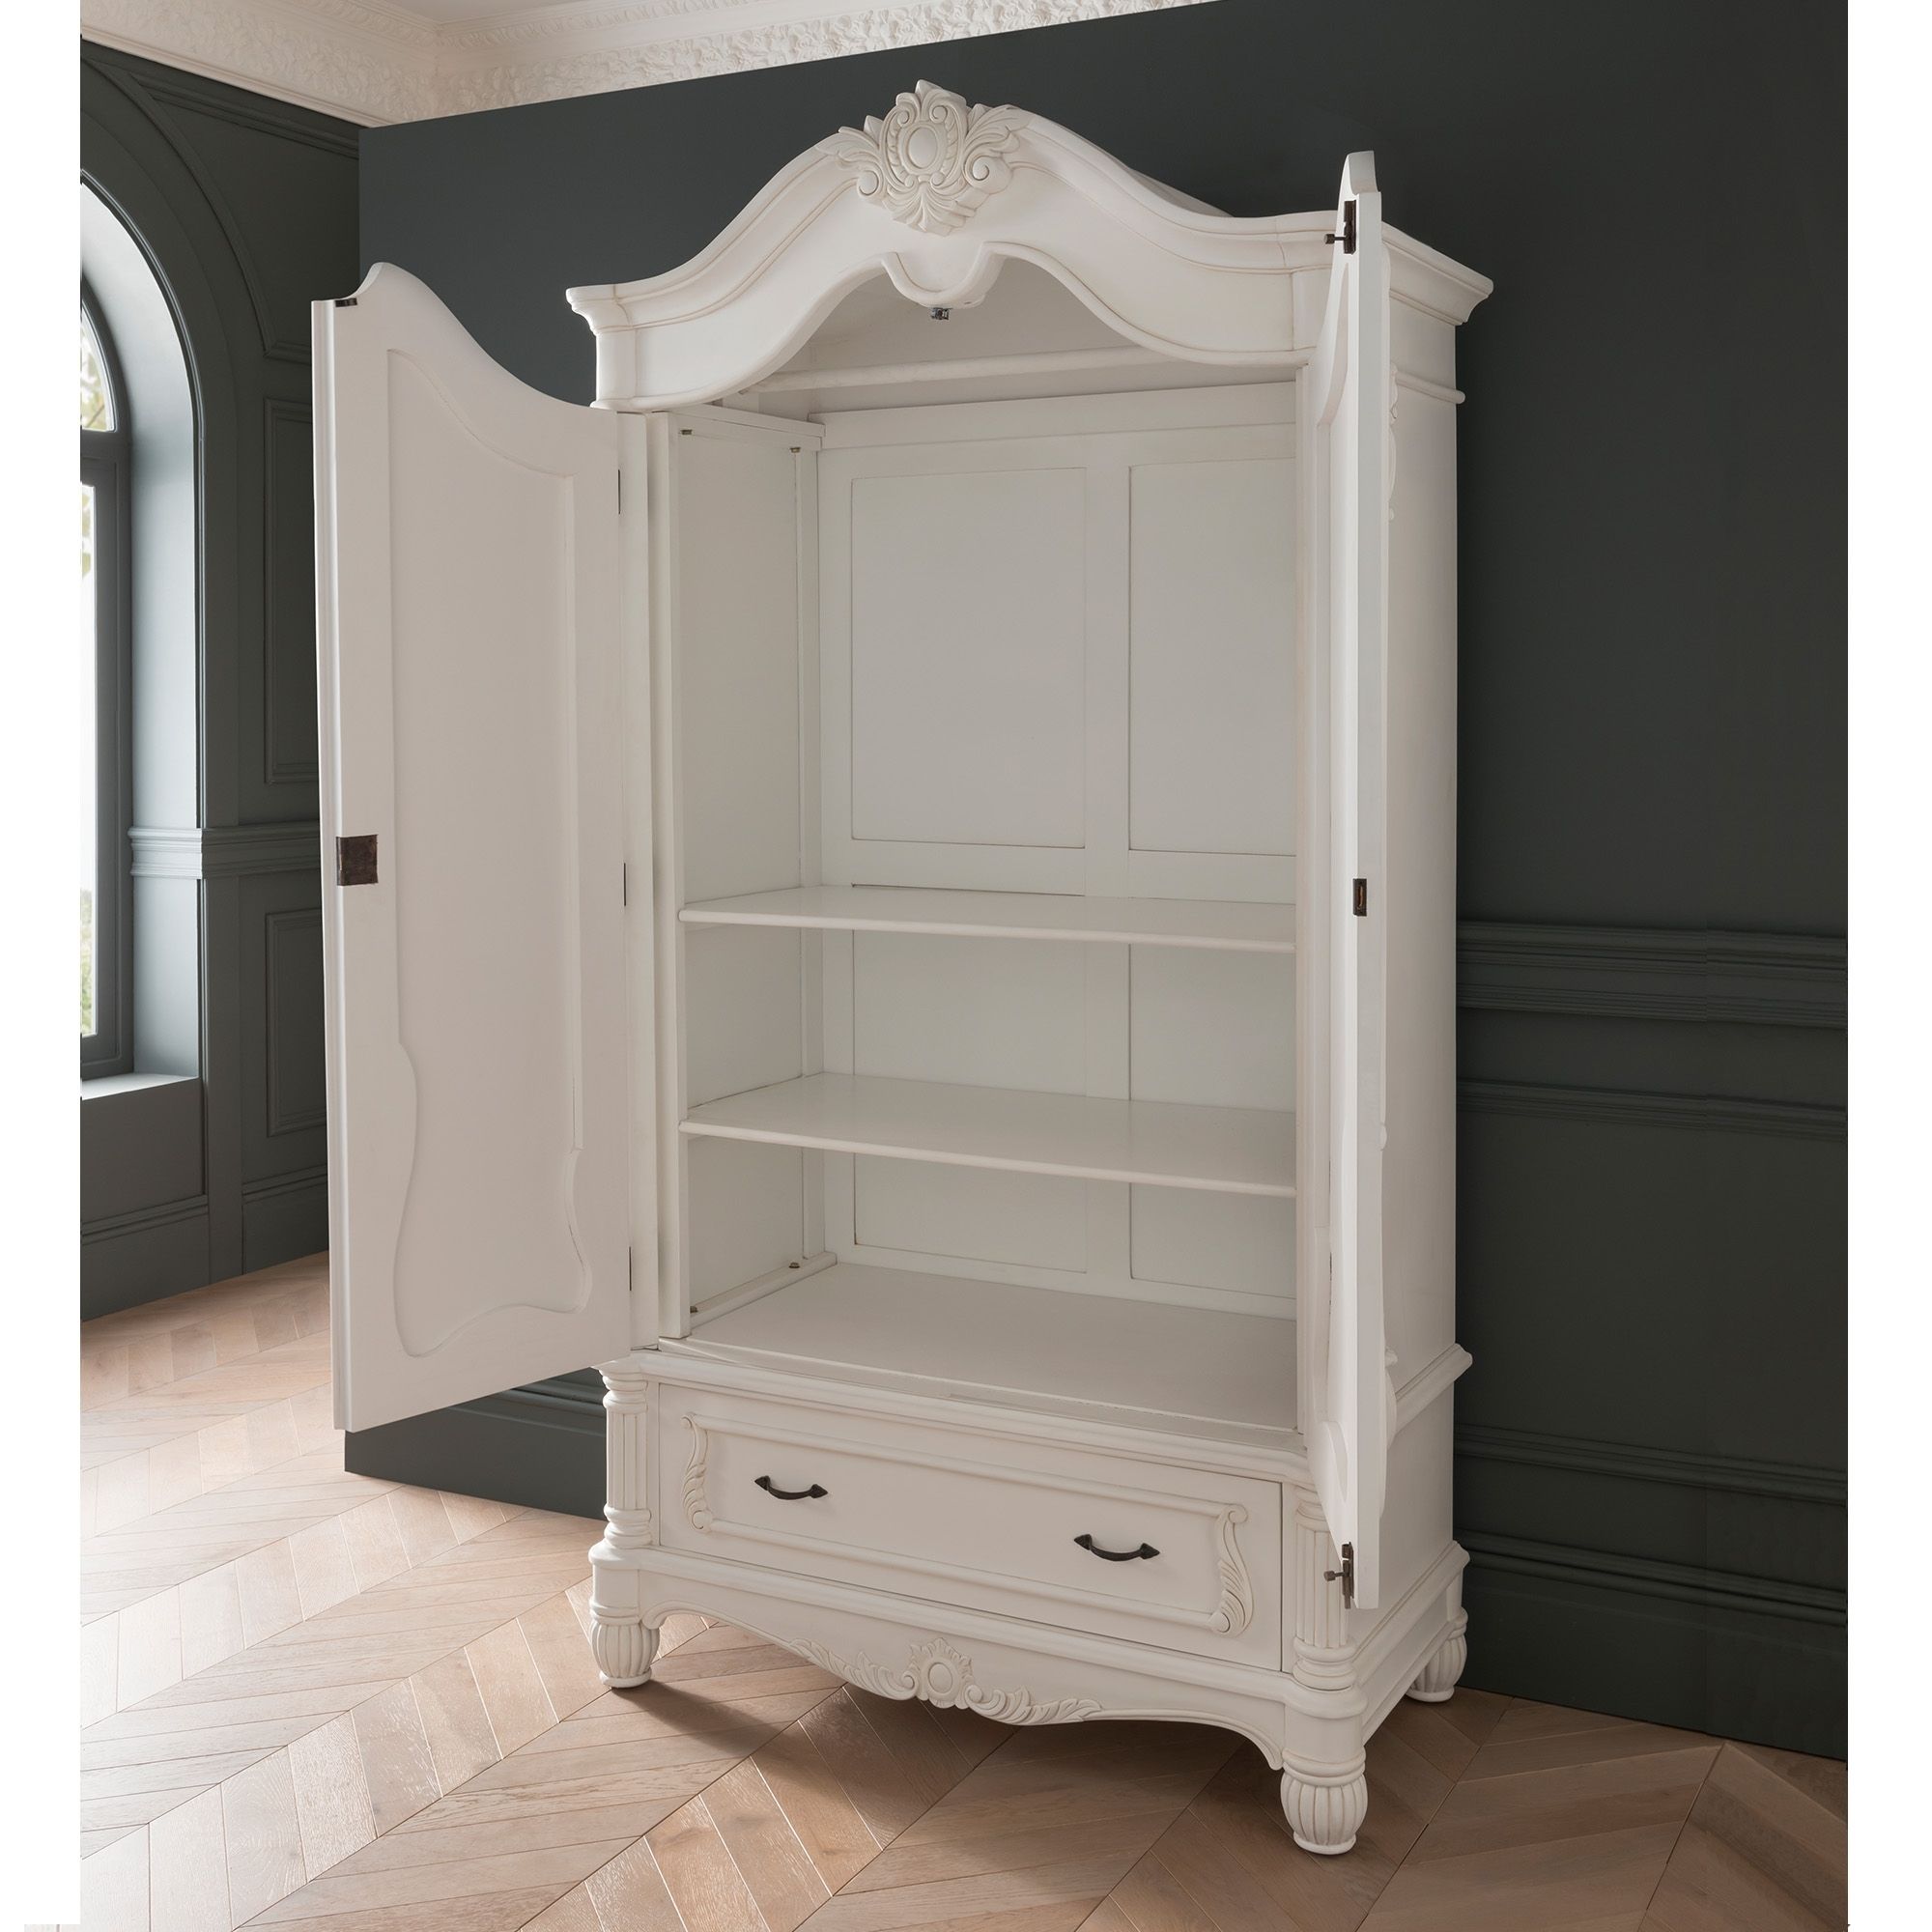 Antique French Style White Finished 1 Drawer Wardrobe | Homesdirect365 Pertaining To Single White Wardrobes With Drawers (Photo 5 of 15)